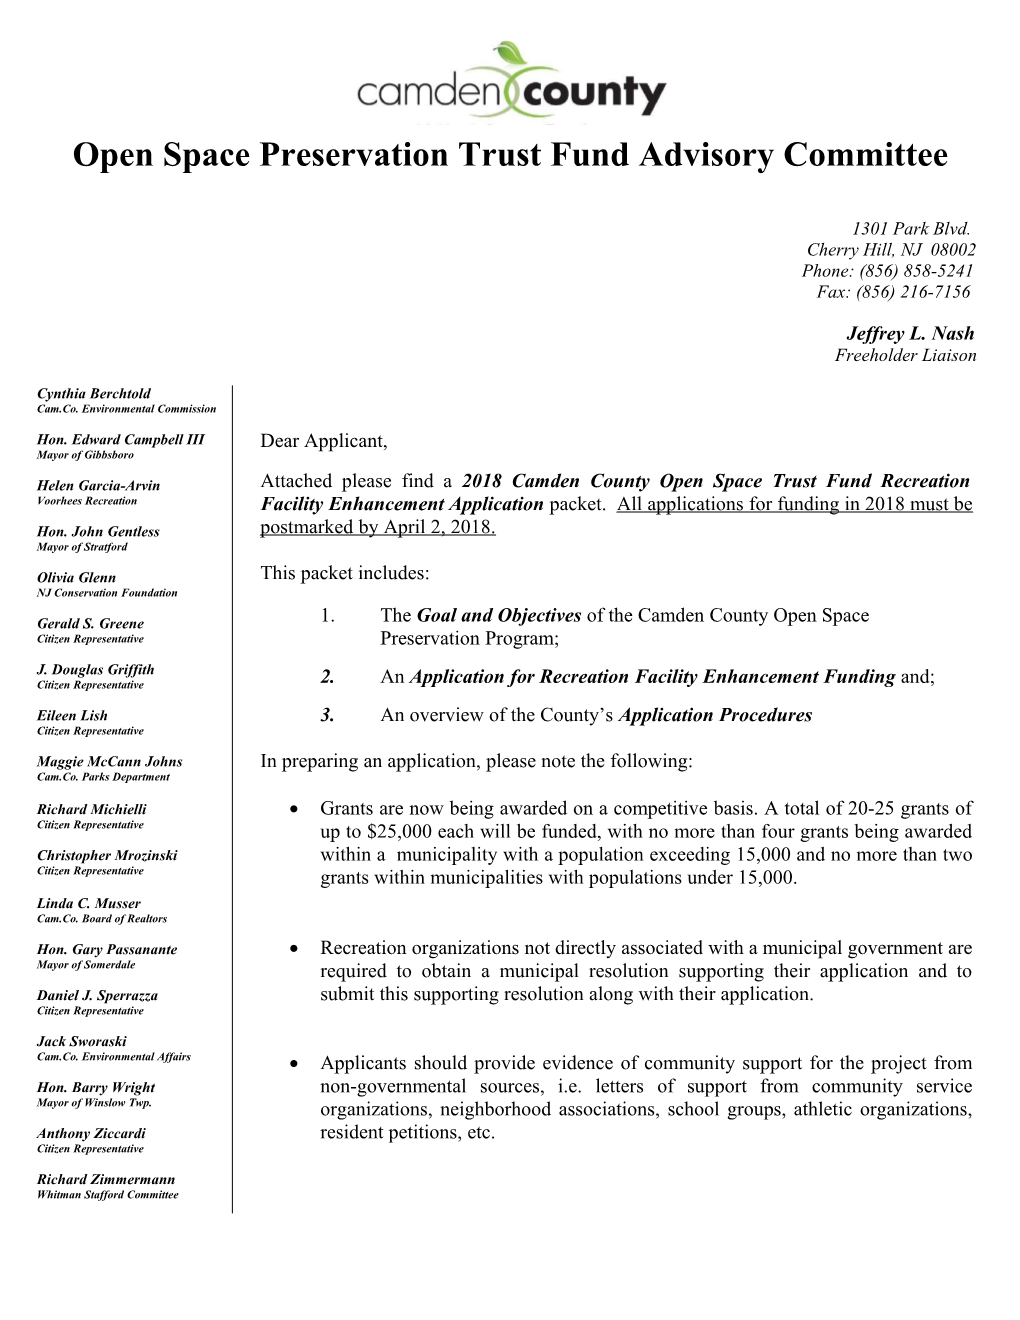 Camden County Open Space Preservation Trust Fund Advisory Committee